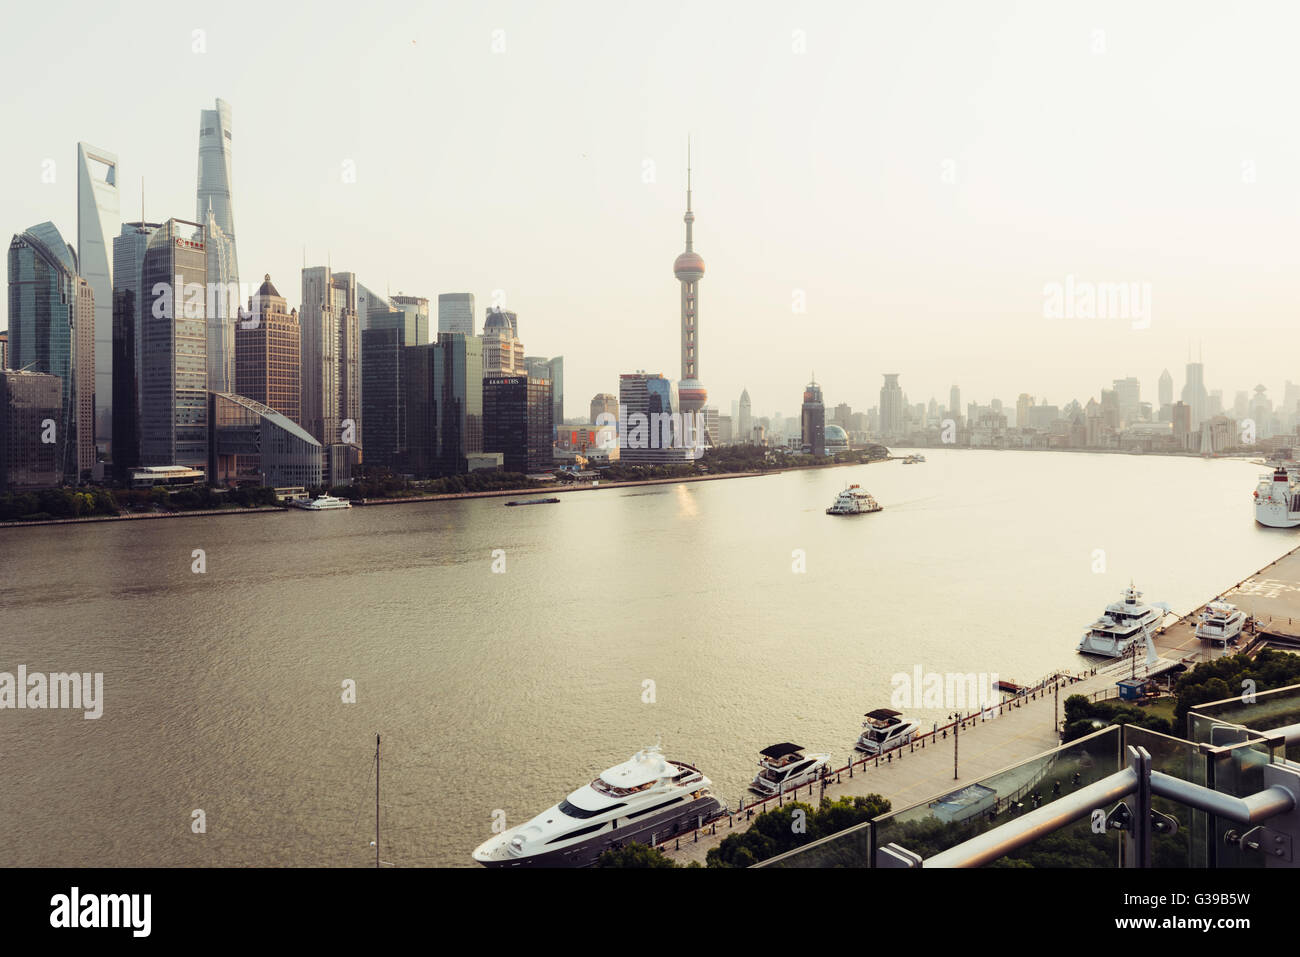 Shanghai, China - October 16, 2015:  Elevated view of  Pudong skyline in Shanghai- China. Stock Photo